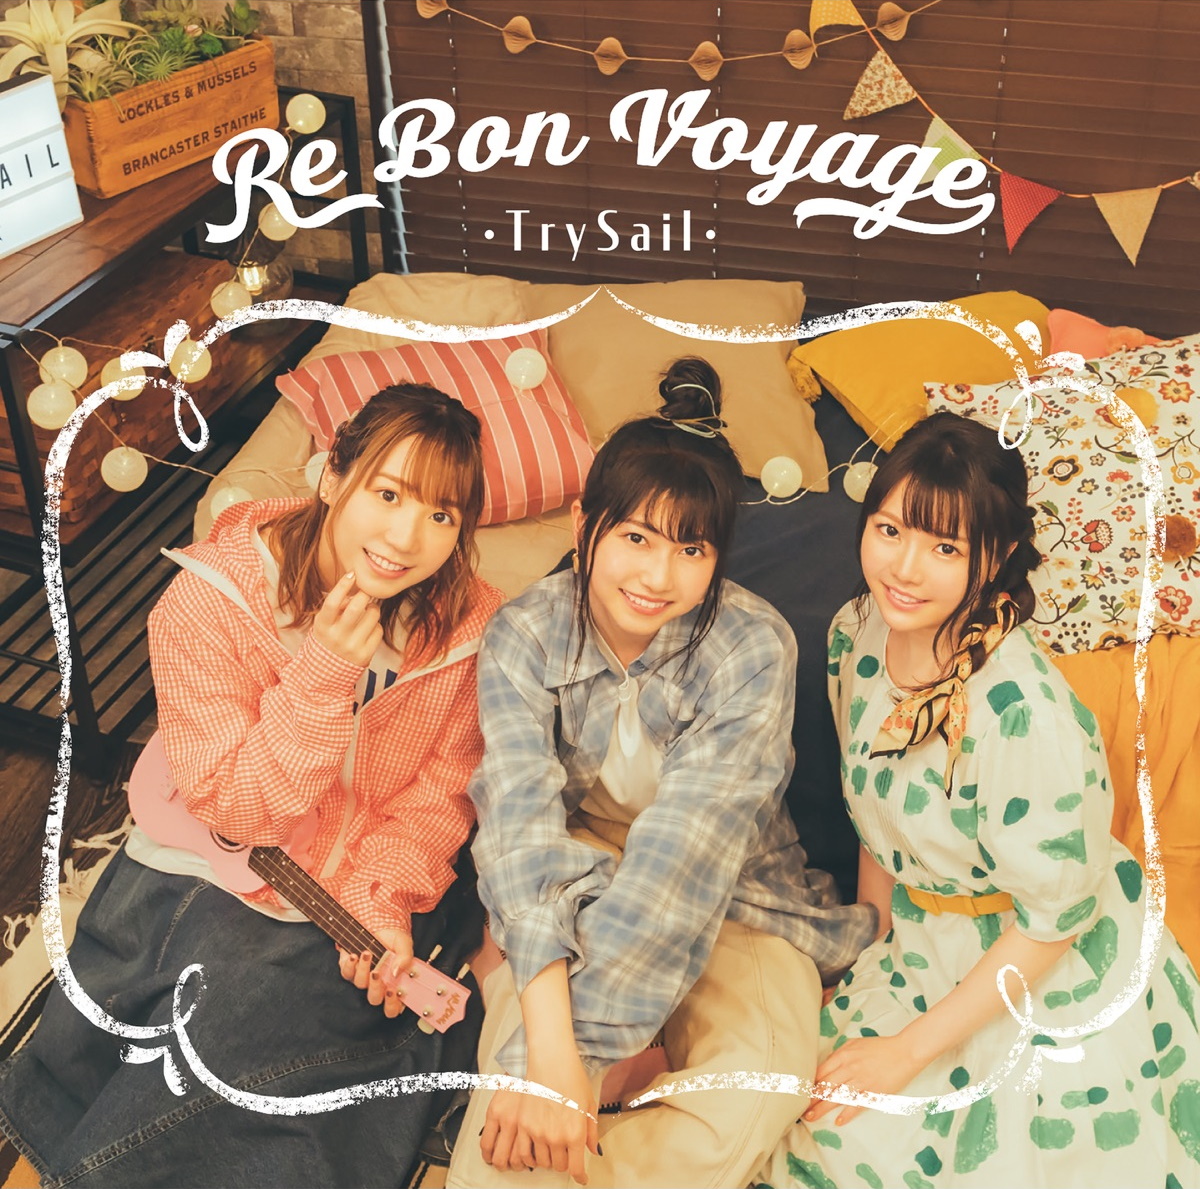 Cover for『TrySail - Good Luck Darling』from the release『Re Bon Voyage』